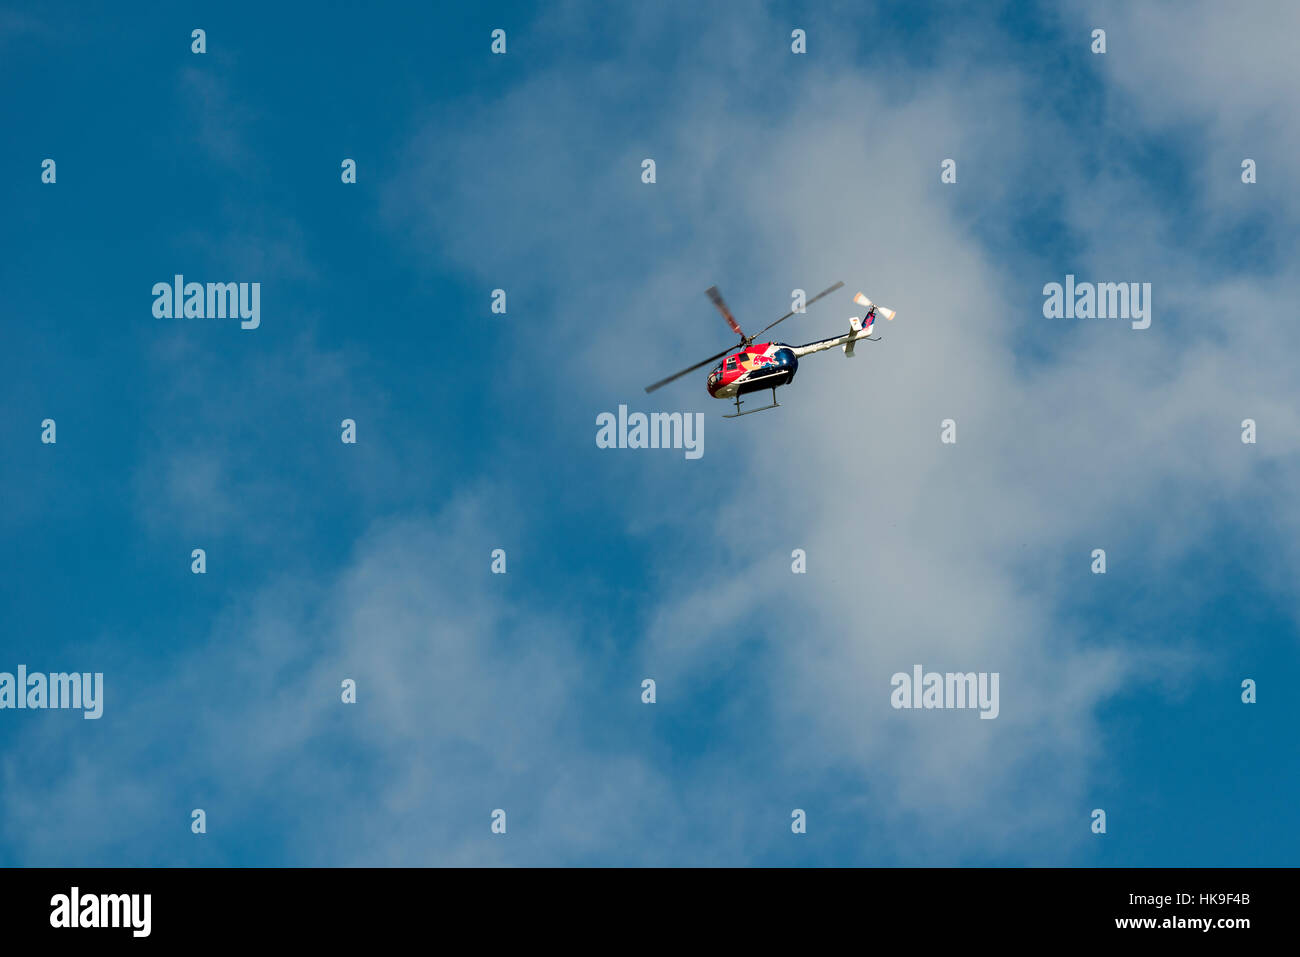 A helicopter is performing stunts in the air Stock Photo